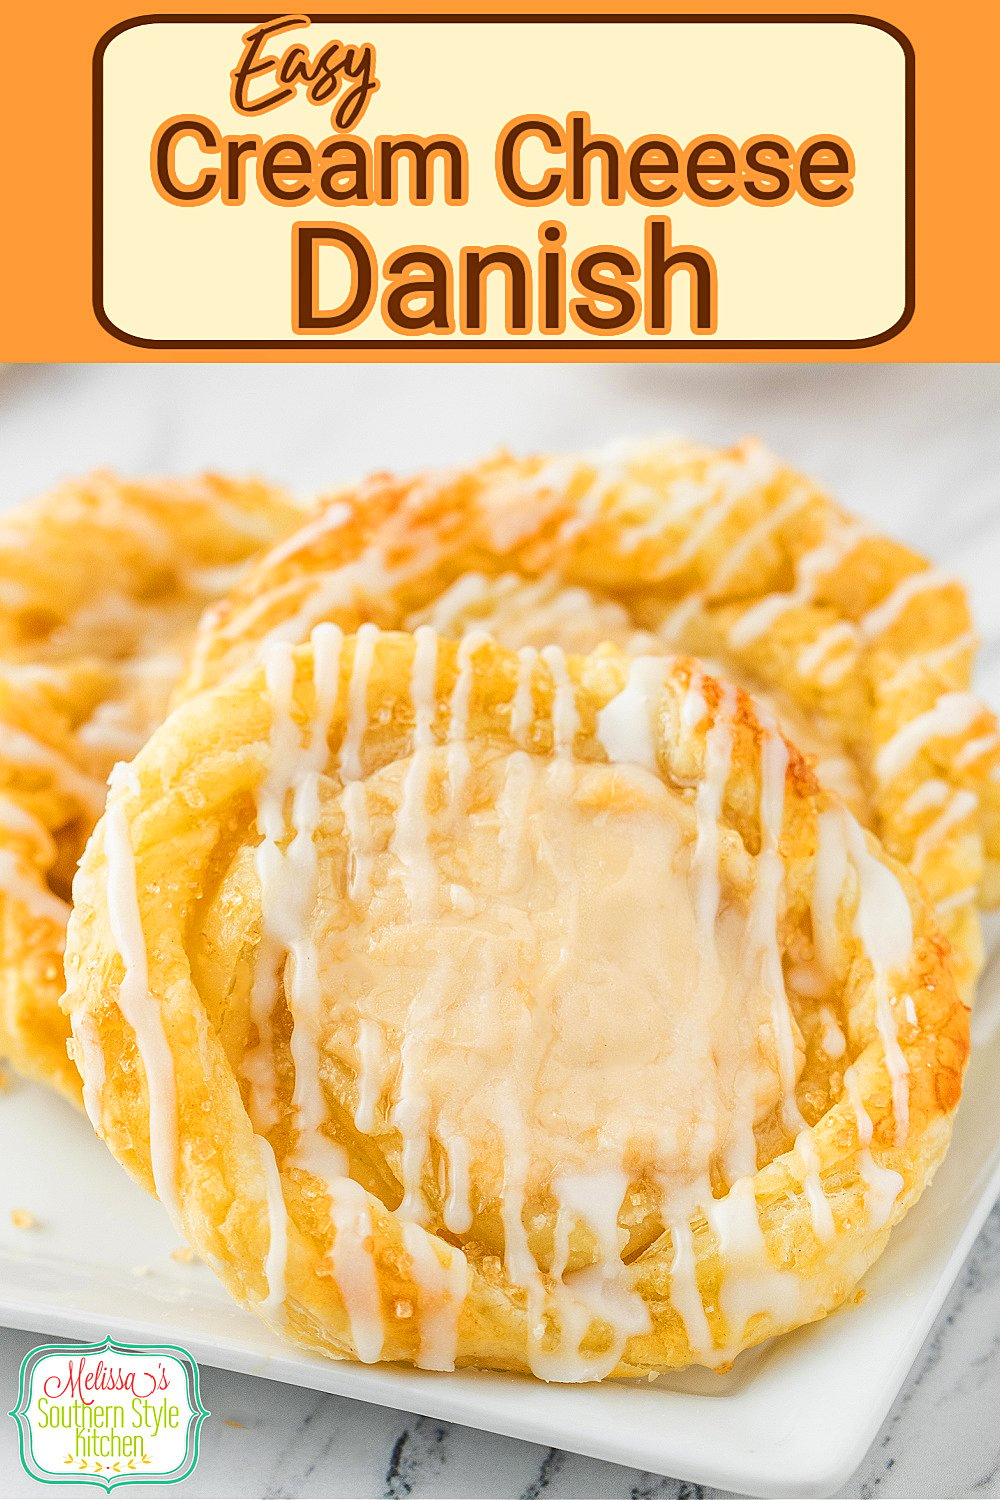 These easy Cream Cheese Danish are made using puff pastry filled with a sweet cheesecake-like filling. #puffpastryrecipes #danish #creamcheesedanish #easydanish #cheesecake #brunchrecipes #breakfast recipes via @melissasssk